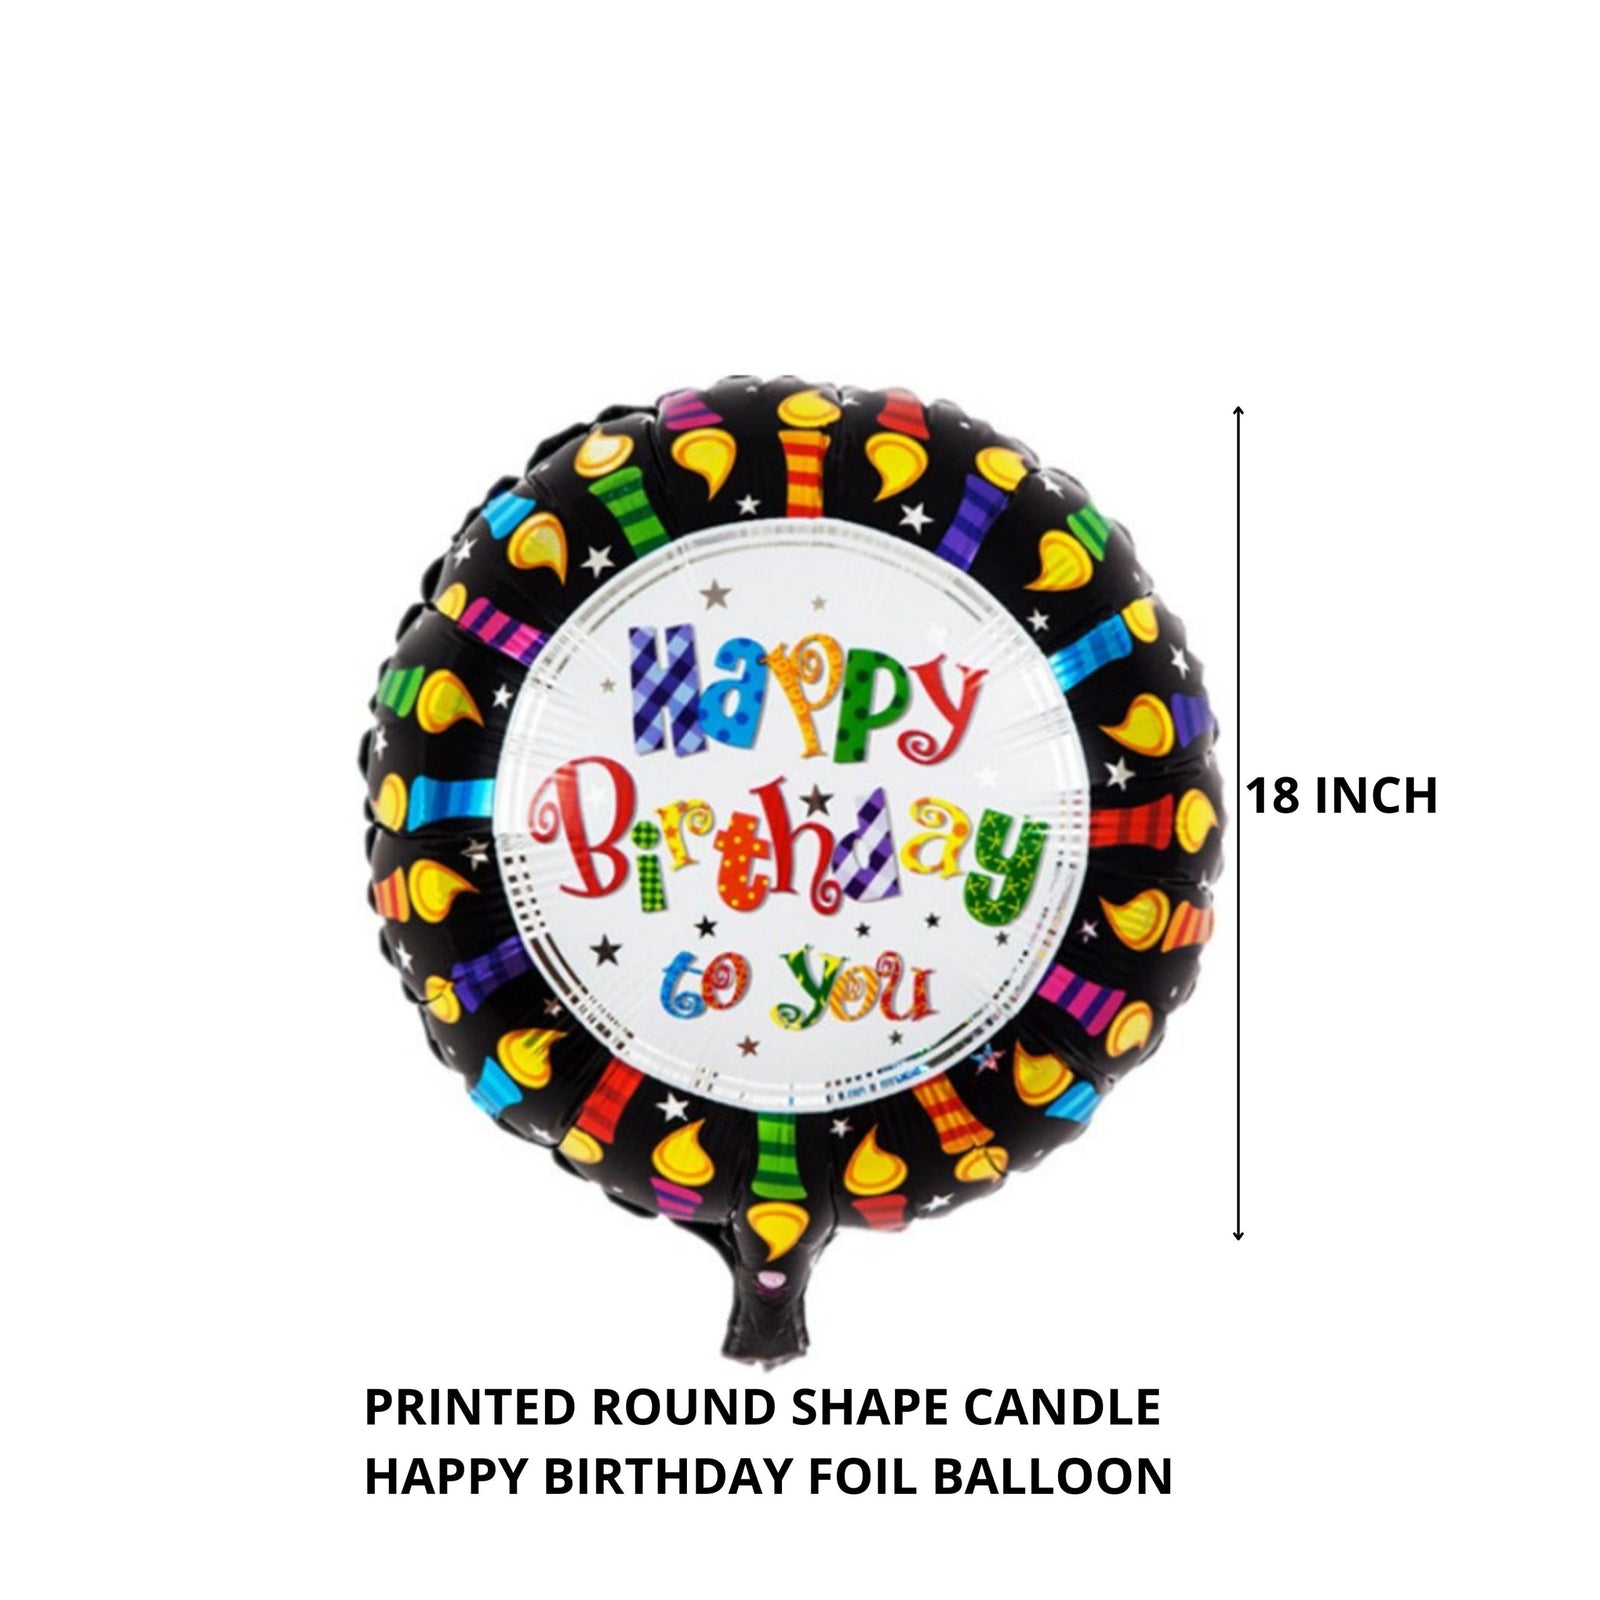 Printed Round Shape Candle Happy Birthday Foil Balloon